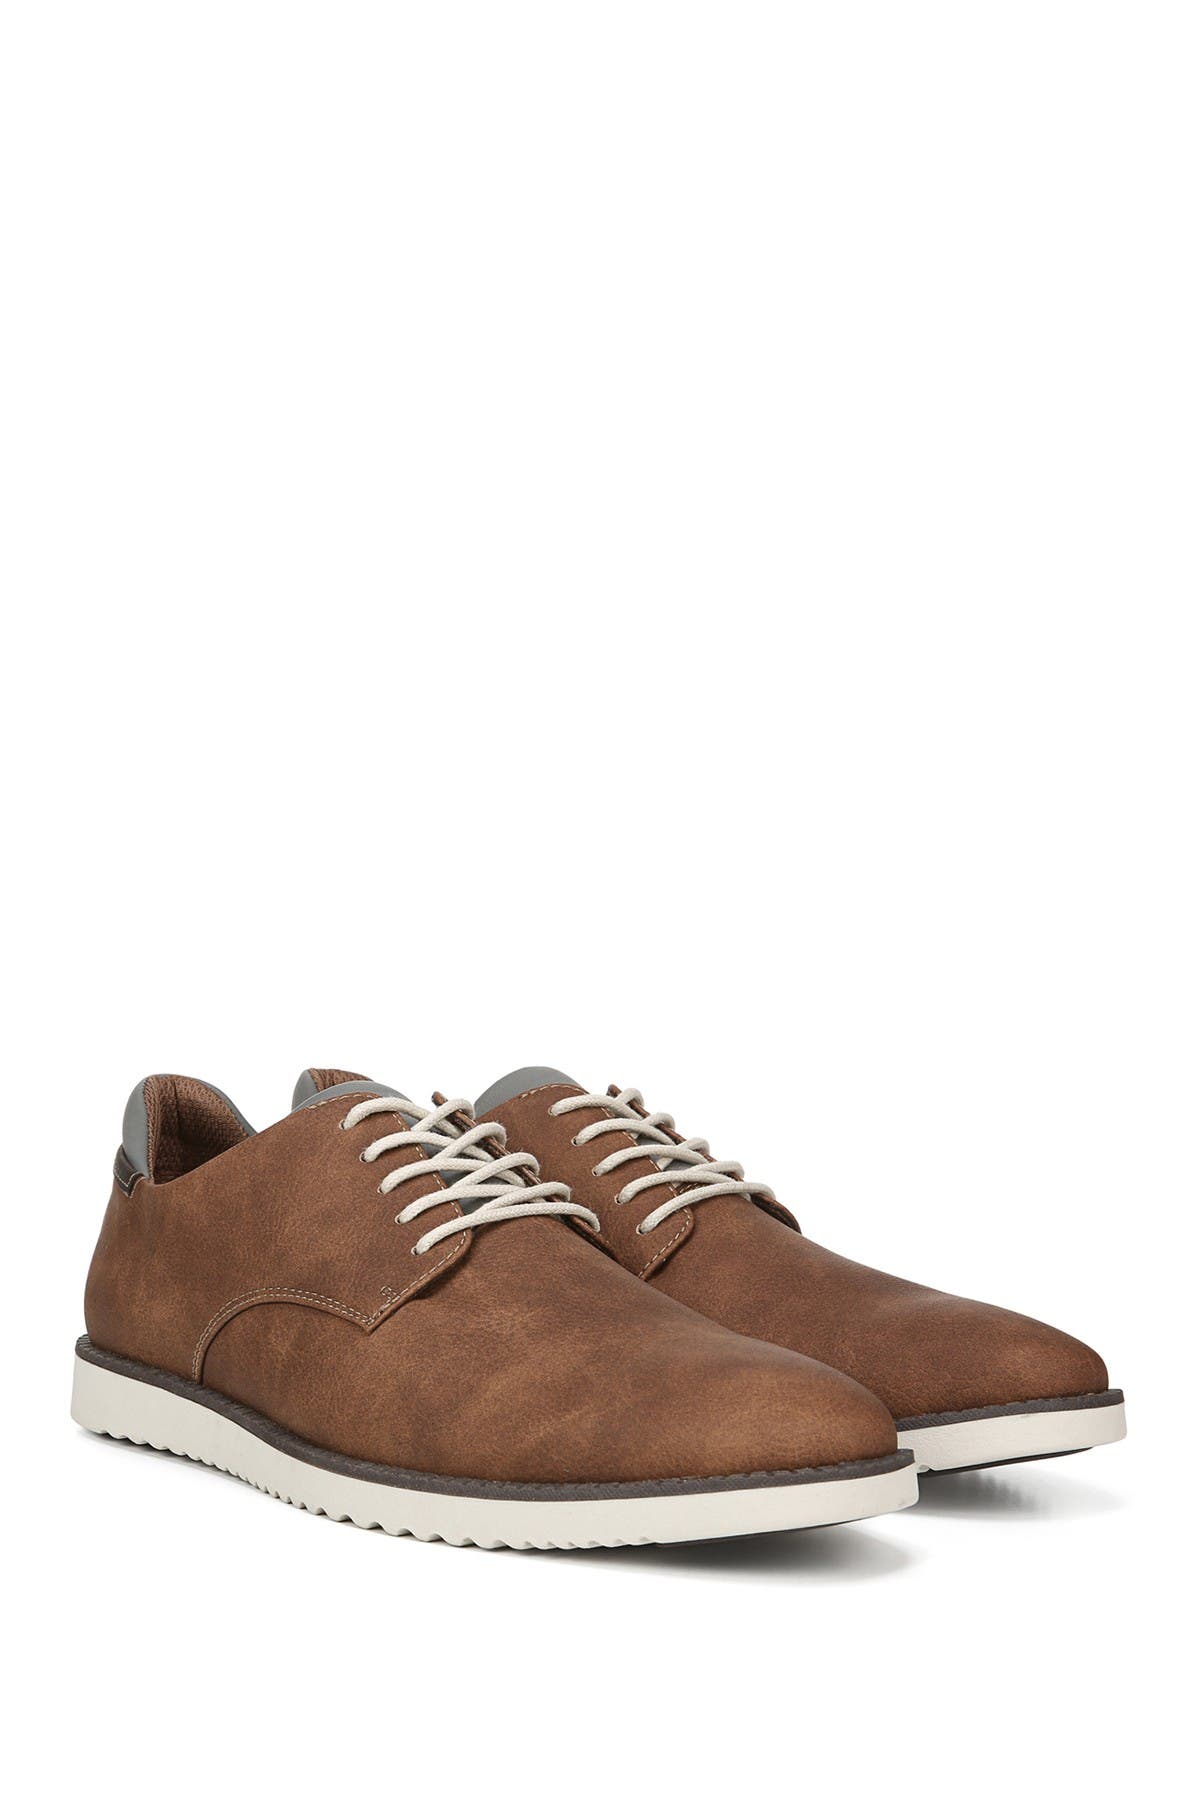 Dr. Scholl's Sync Oxford In Brown